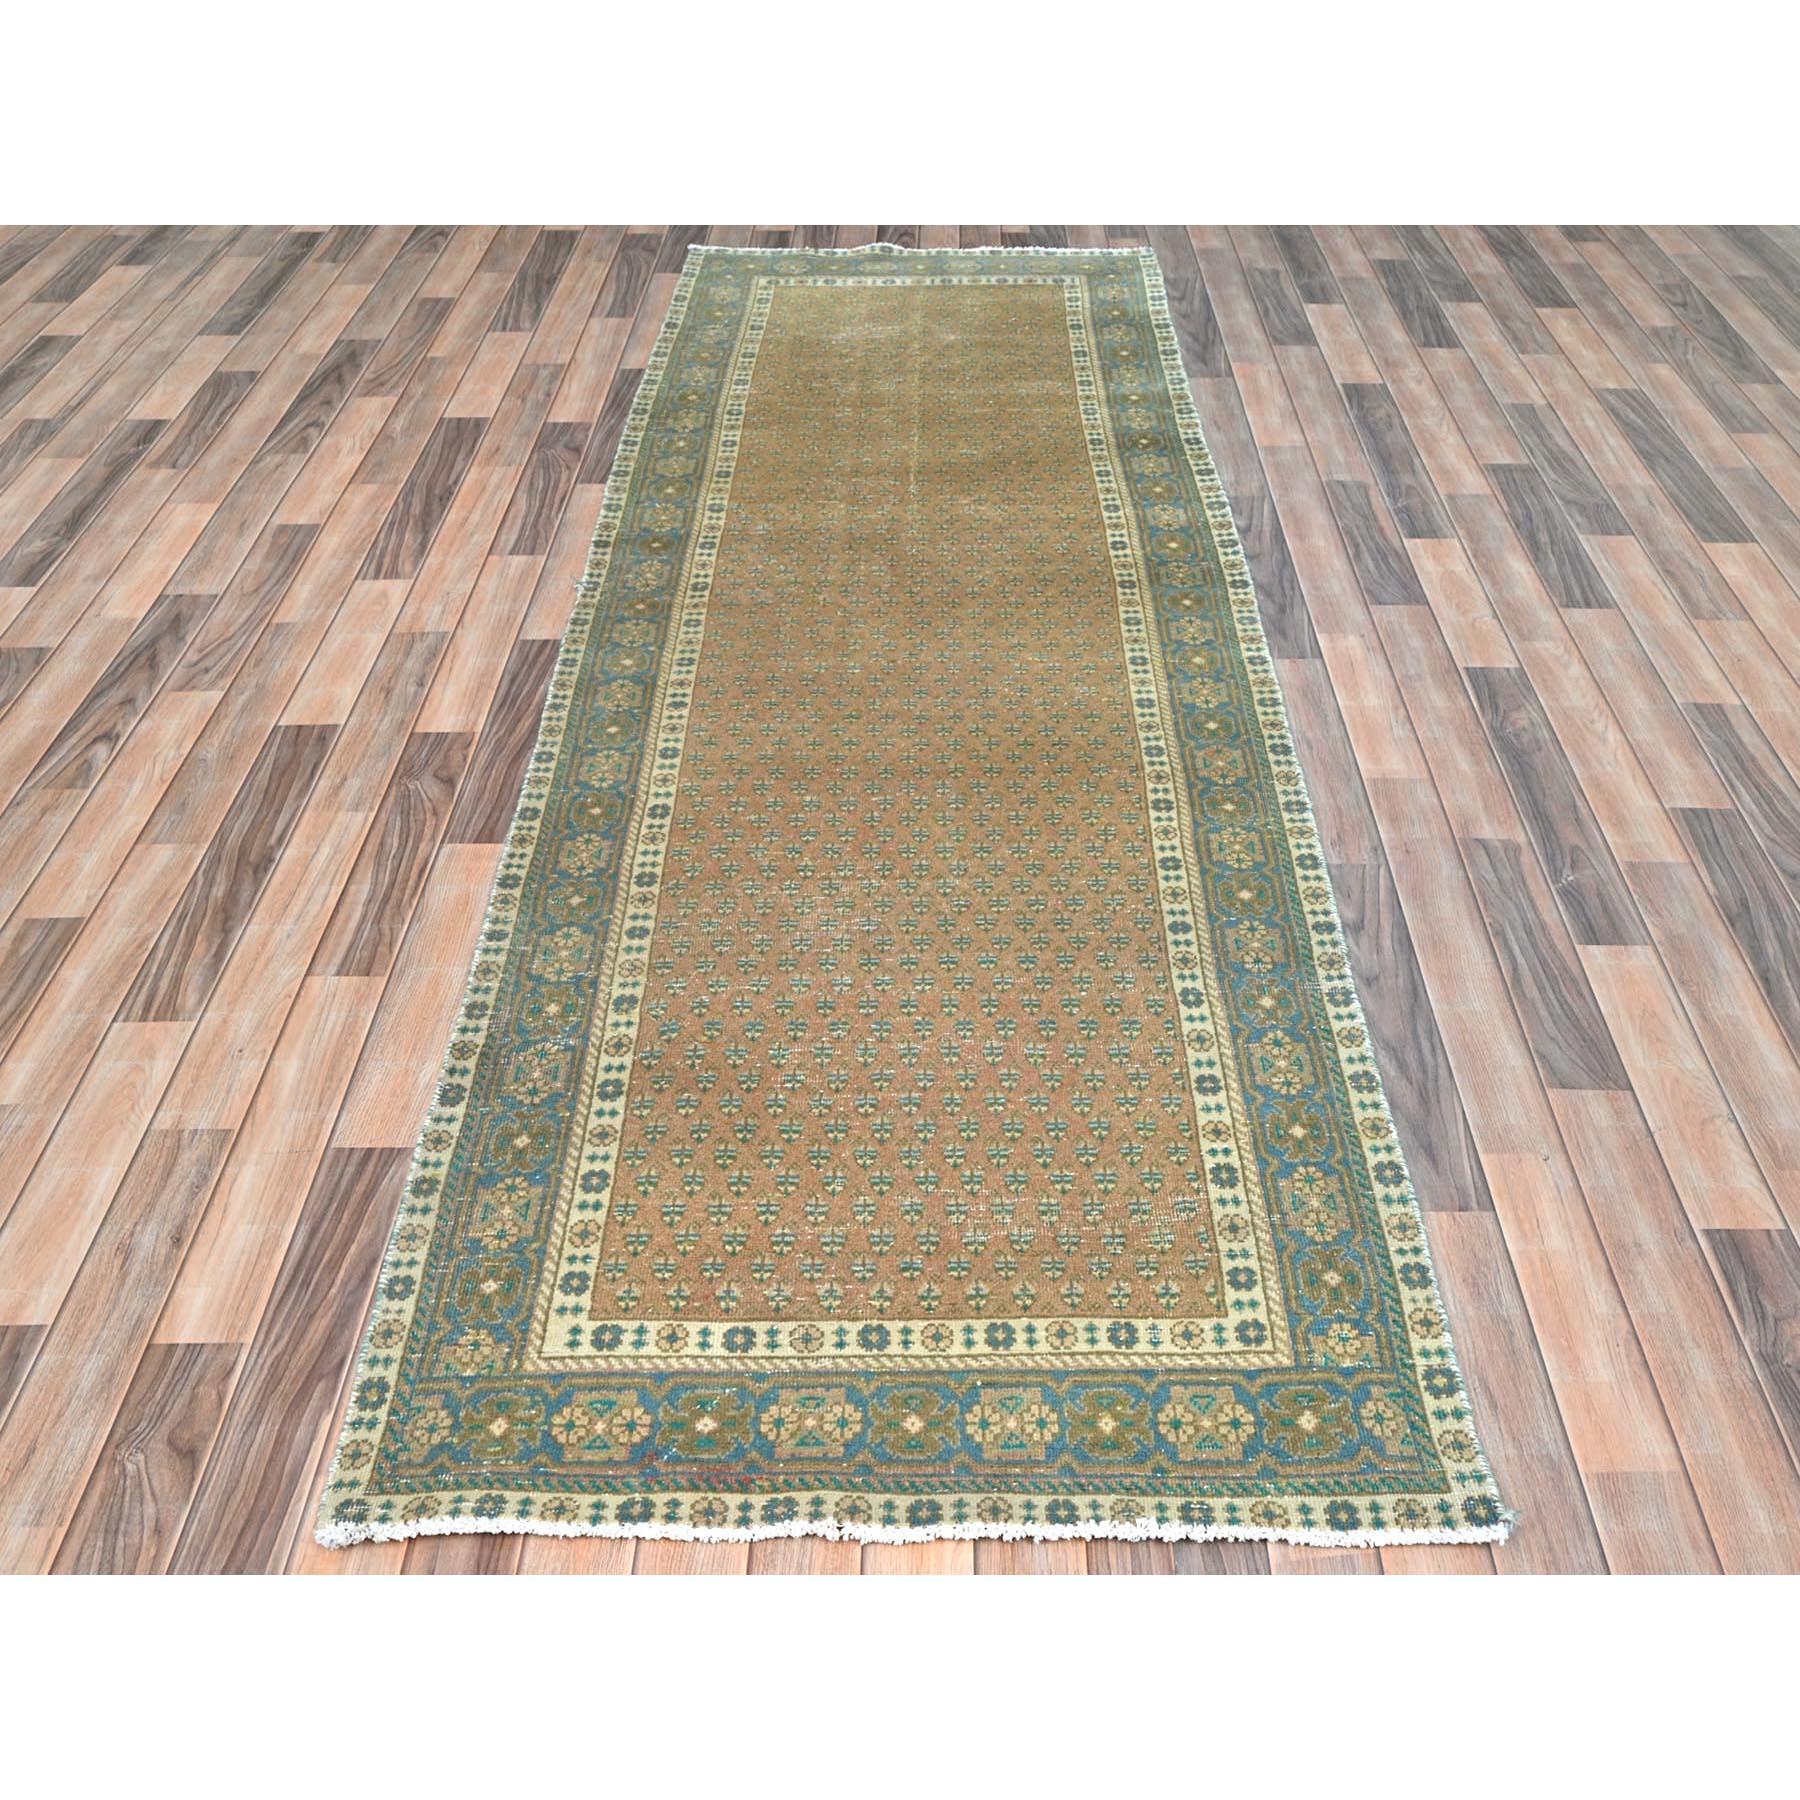 This fabulous hand-knotted carpet has been created and designed for extra strength and durability. This rug has been handcrafted for weeks in the traditional method that is used to make
Exact Rug Size in Feet and Inches : 3'6